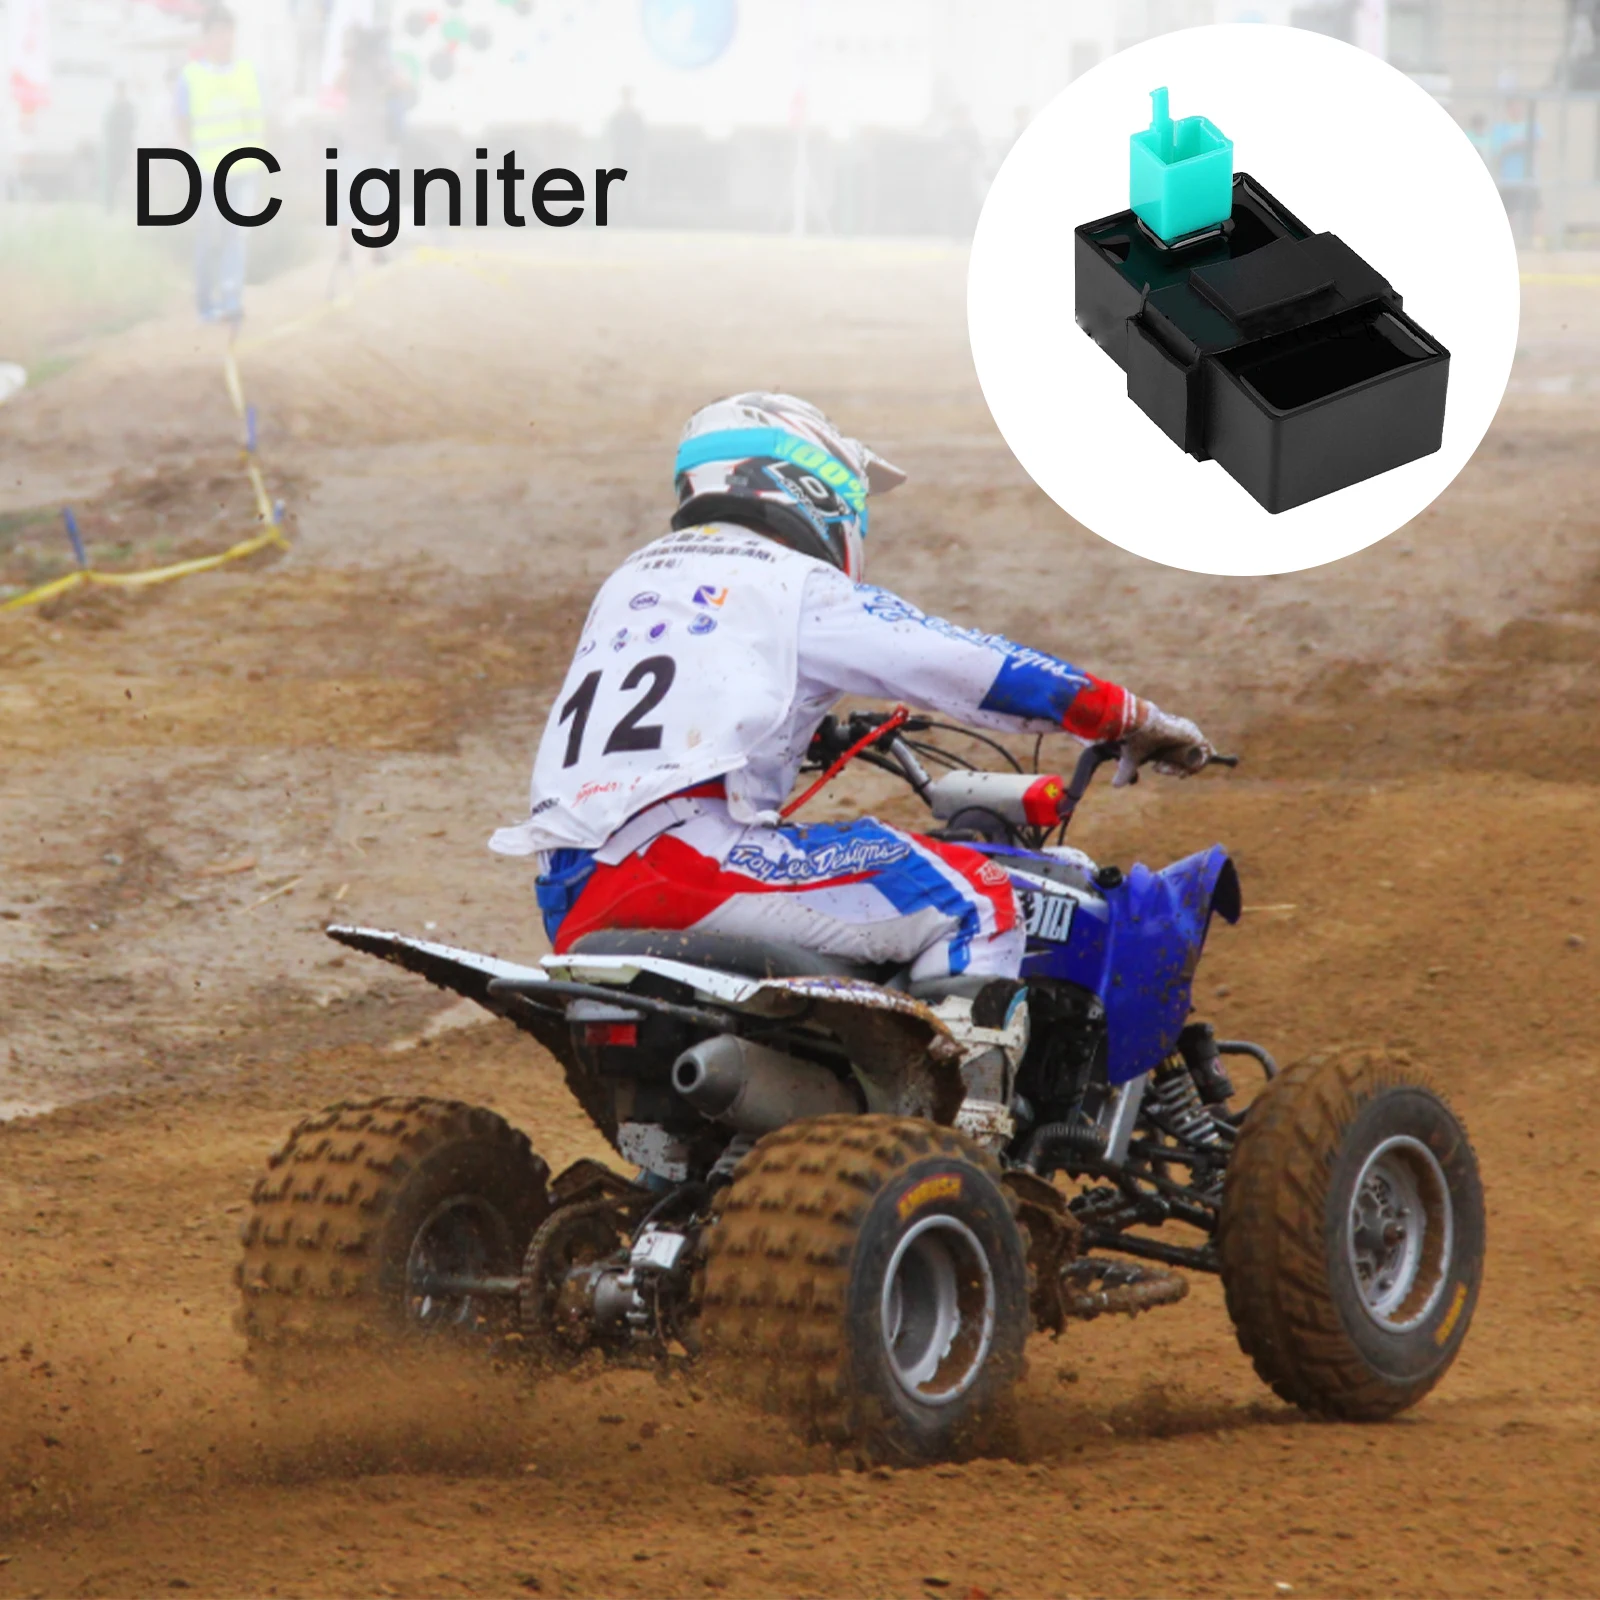 

4 Pin DC CDI Box Ignition For 125CC 150CC 200CC 250CC 300CC ATV Dirt Pit Go Kart Motorcycle Accessories Electrical Ignition New